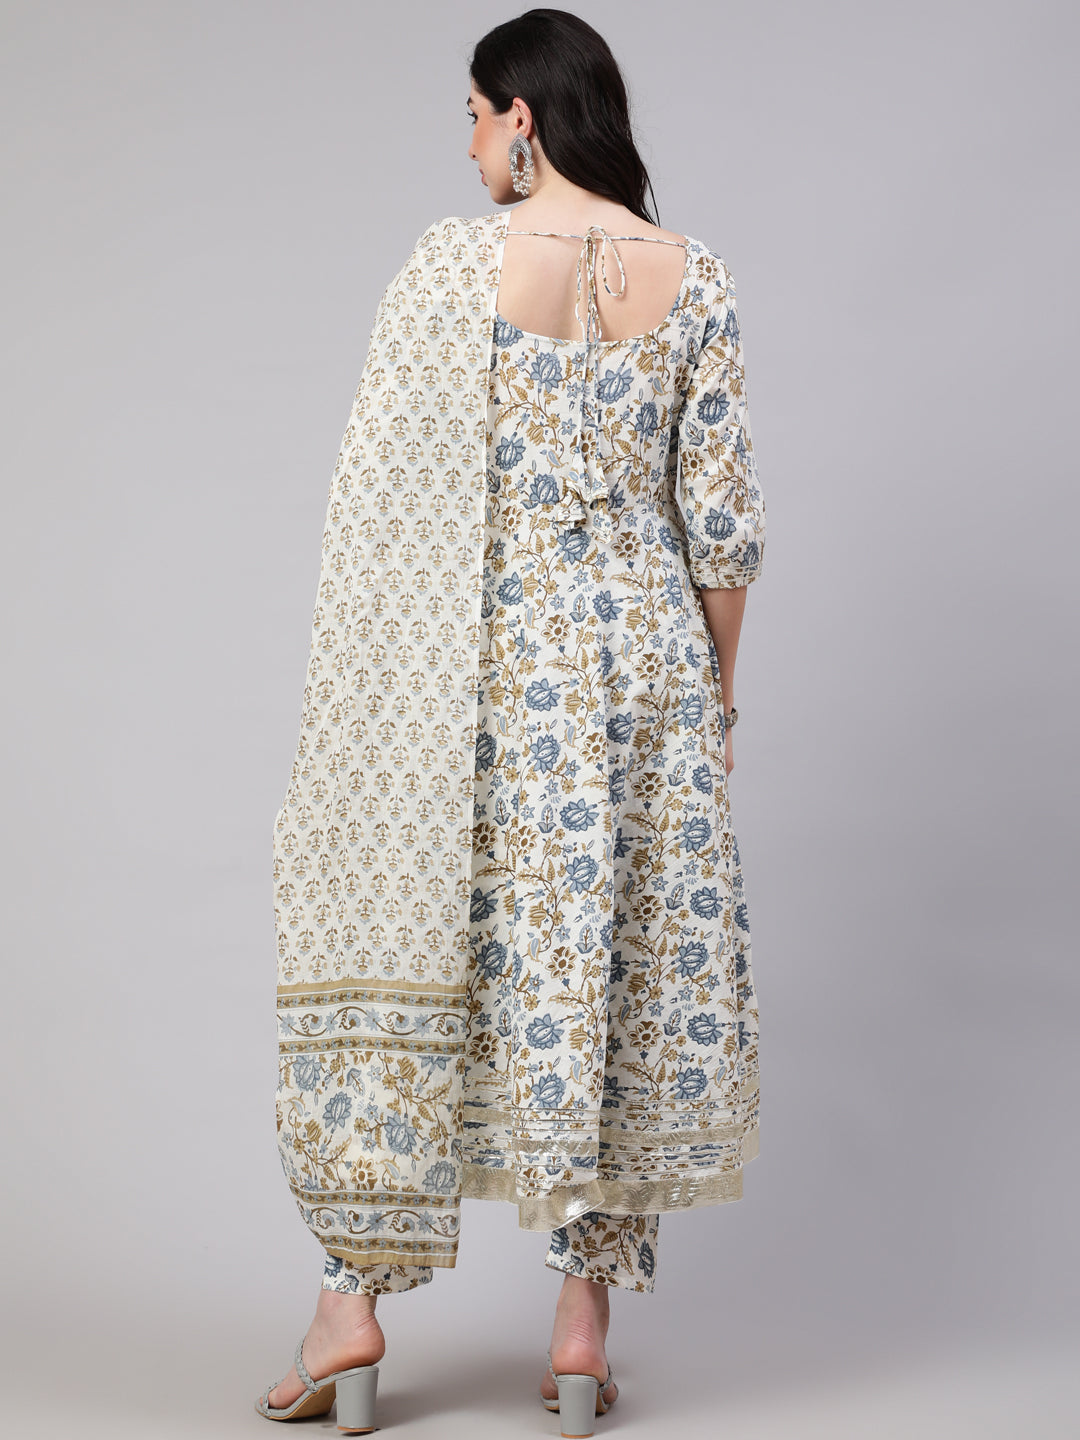 Women's Off-White Floral Printed Flared Kurta With Trouser And Dupatta - Nayo Clothing